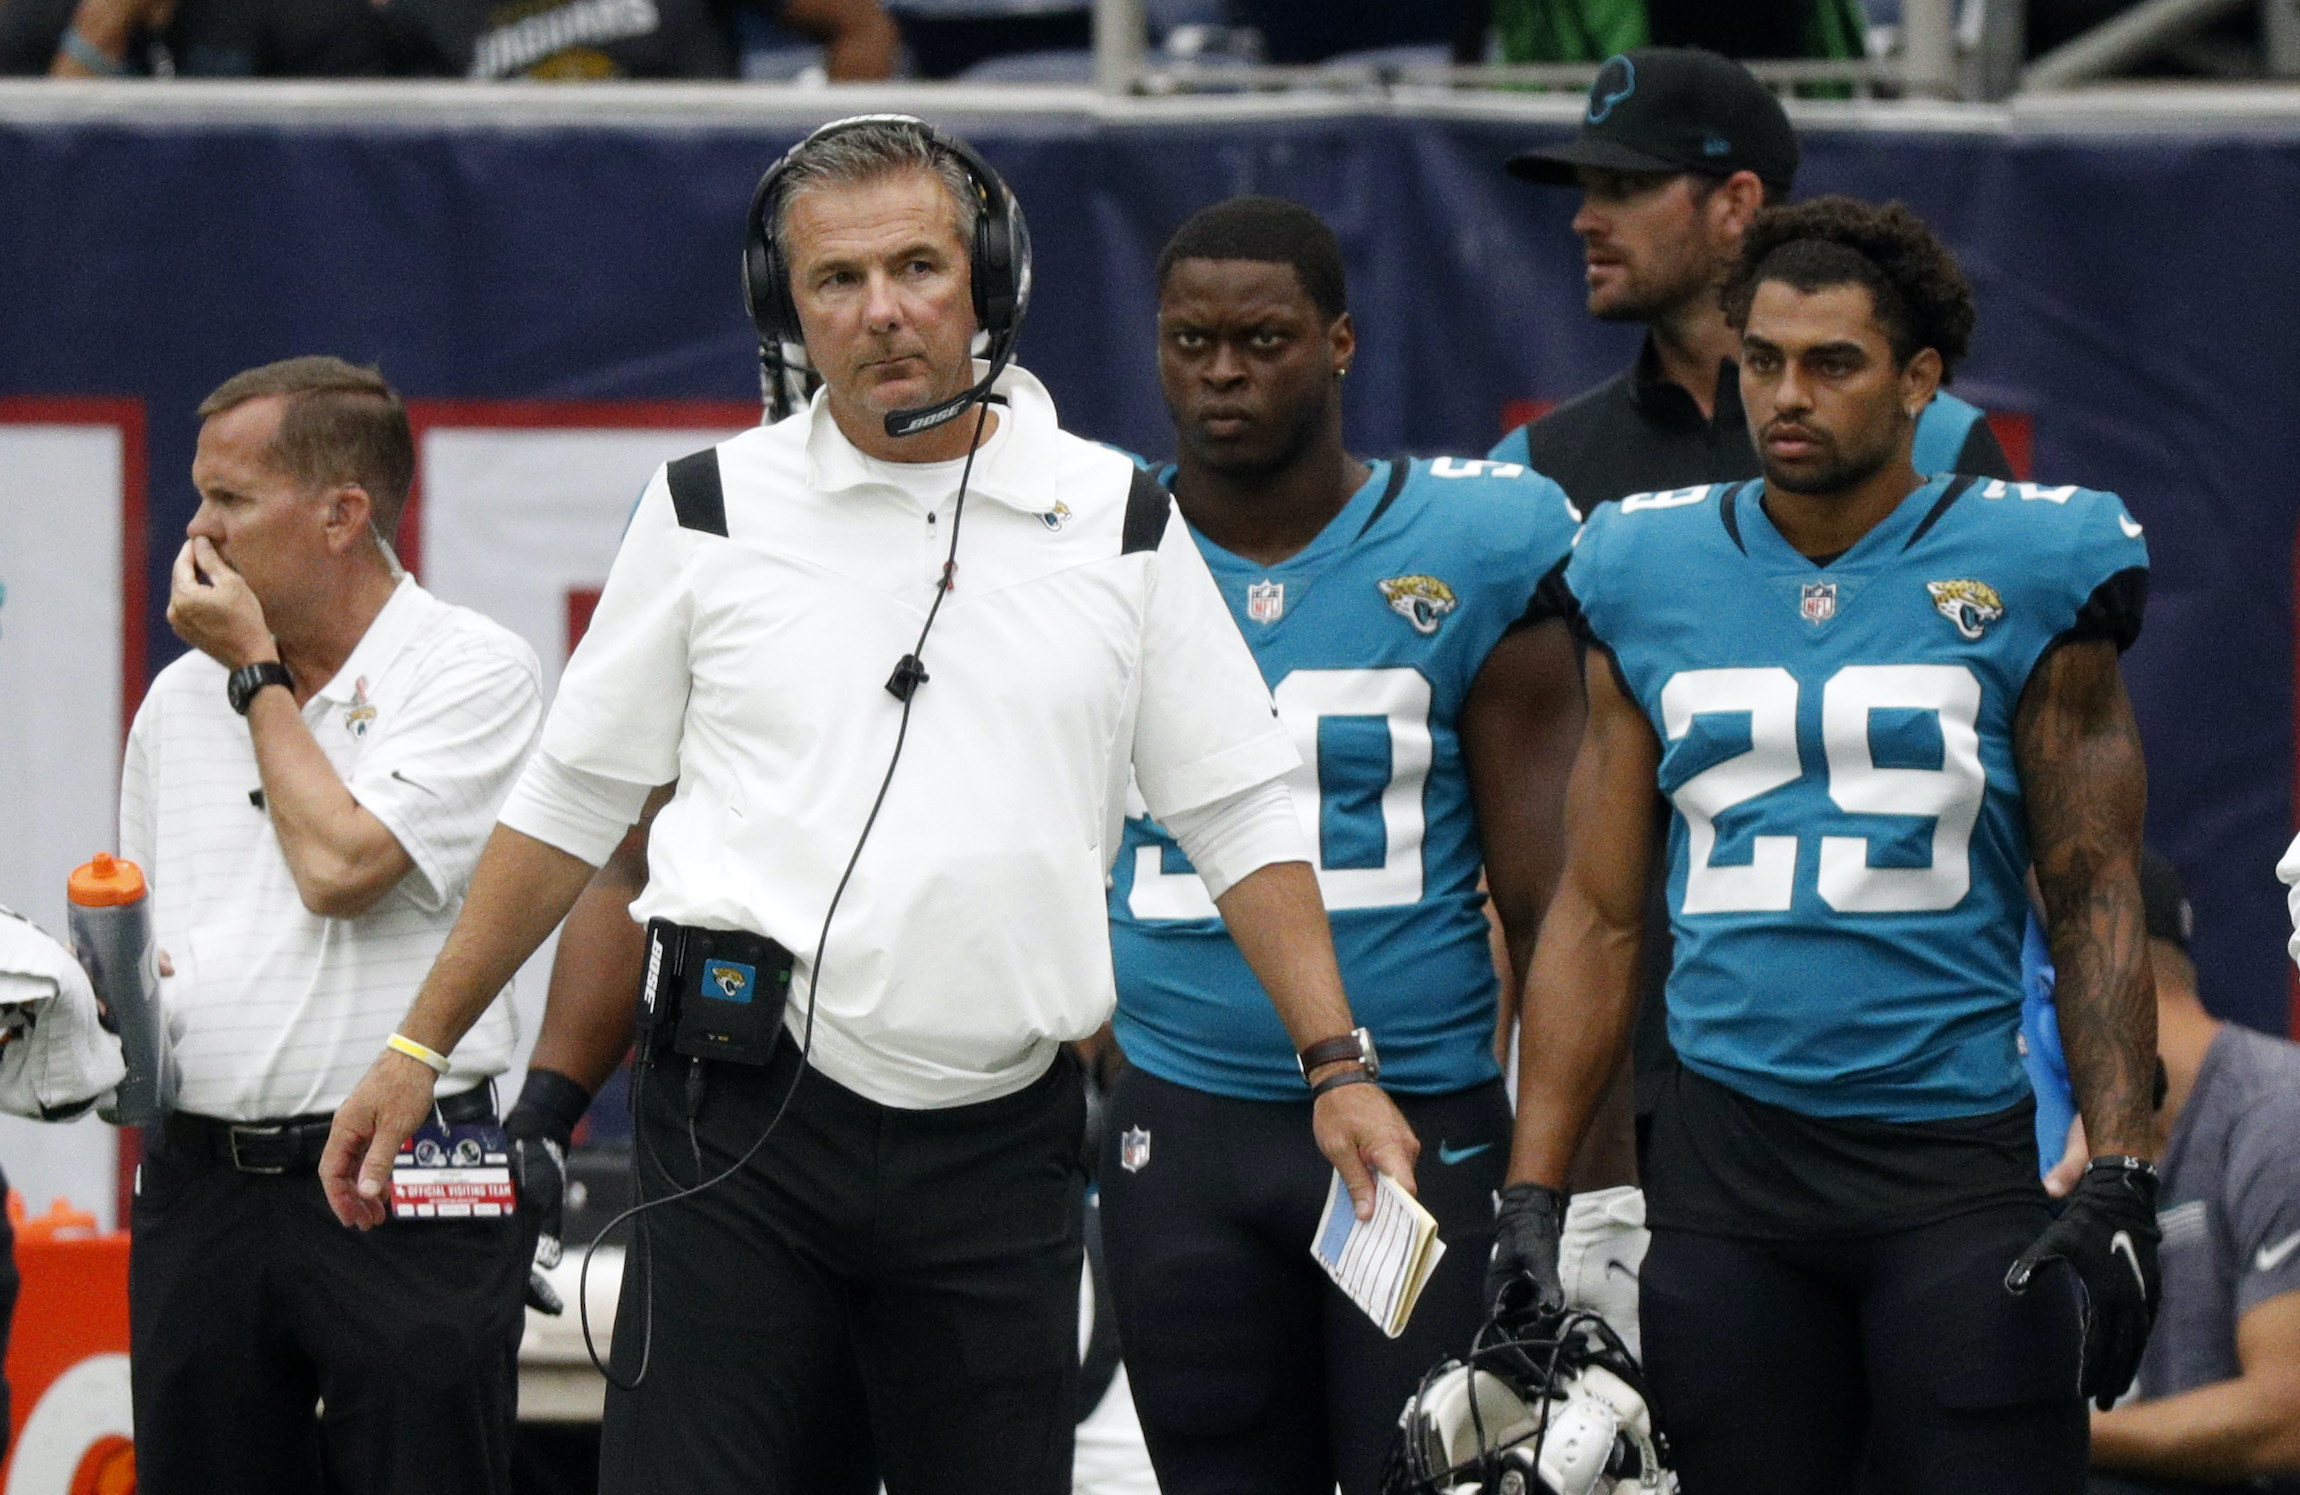 Head coach Urban Meyer of the Jacksonville Jaguars looks on during the game against the Houston Texans at NRG Stadium on September 12, 2021 in Houston, Texas.